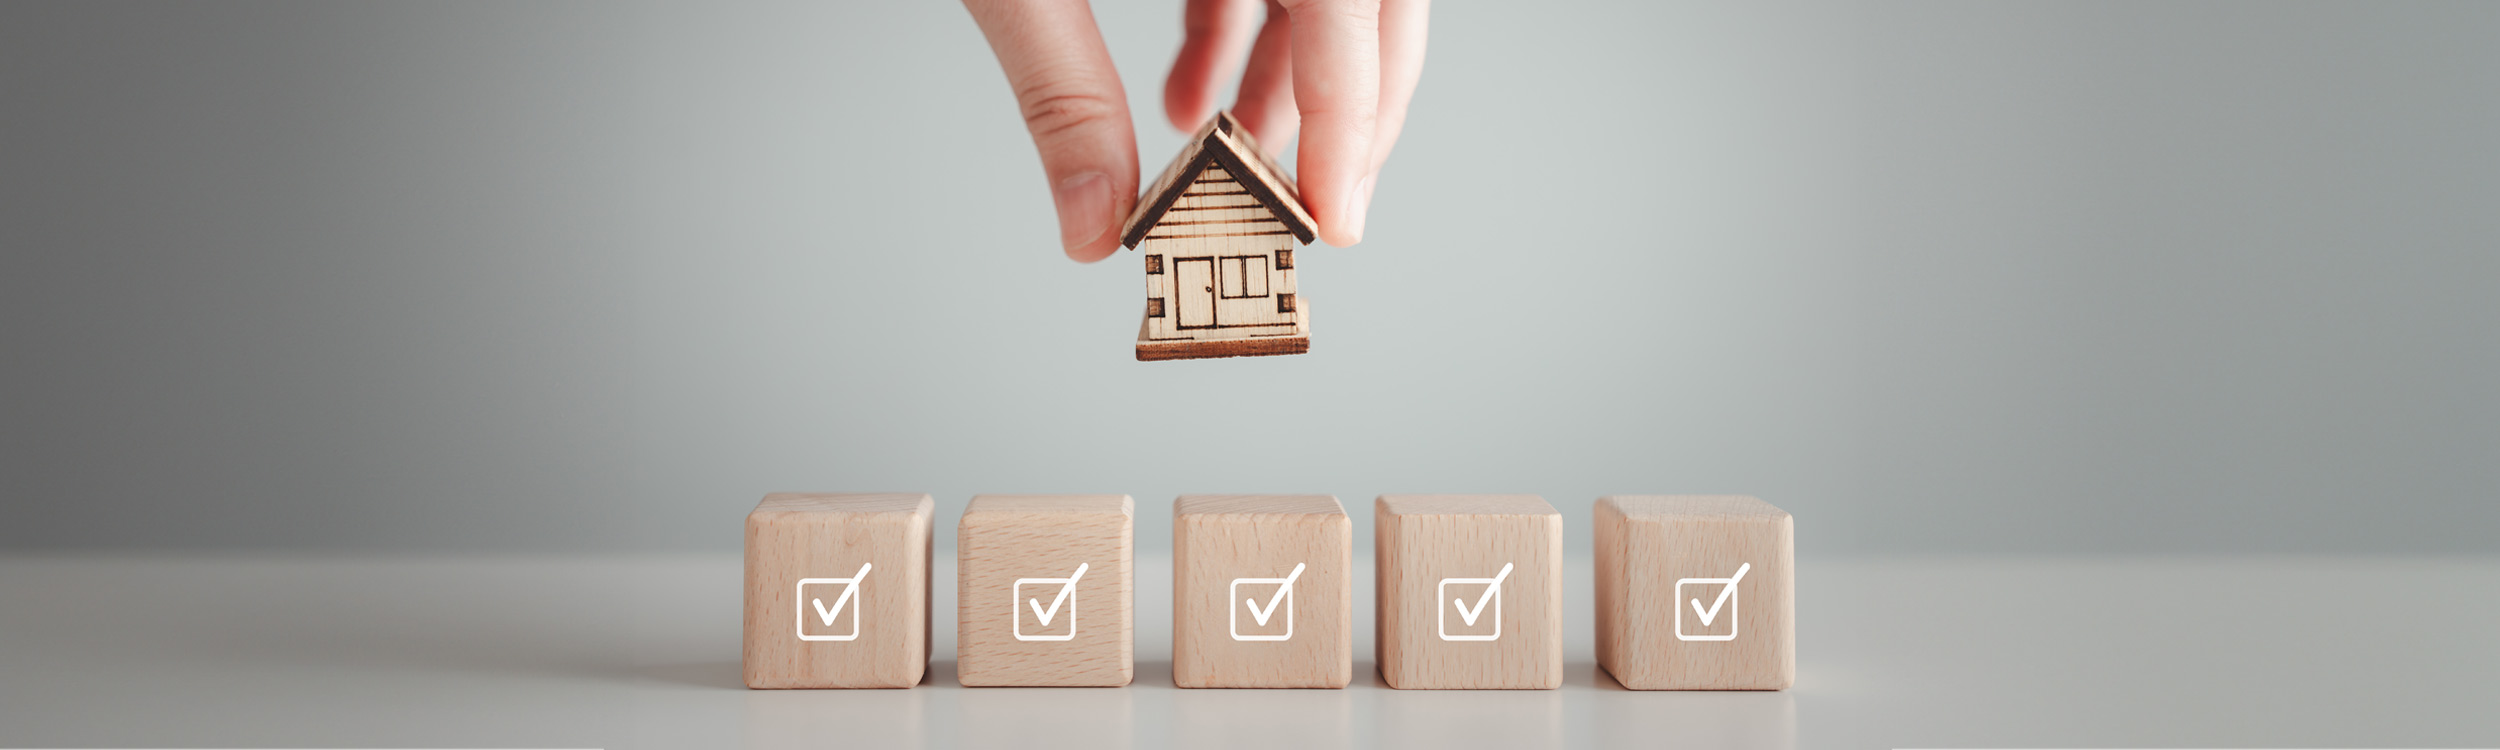 Your home loan application checklist